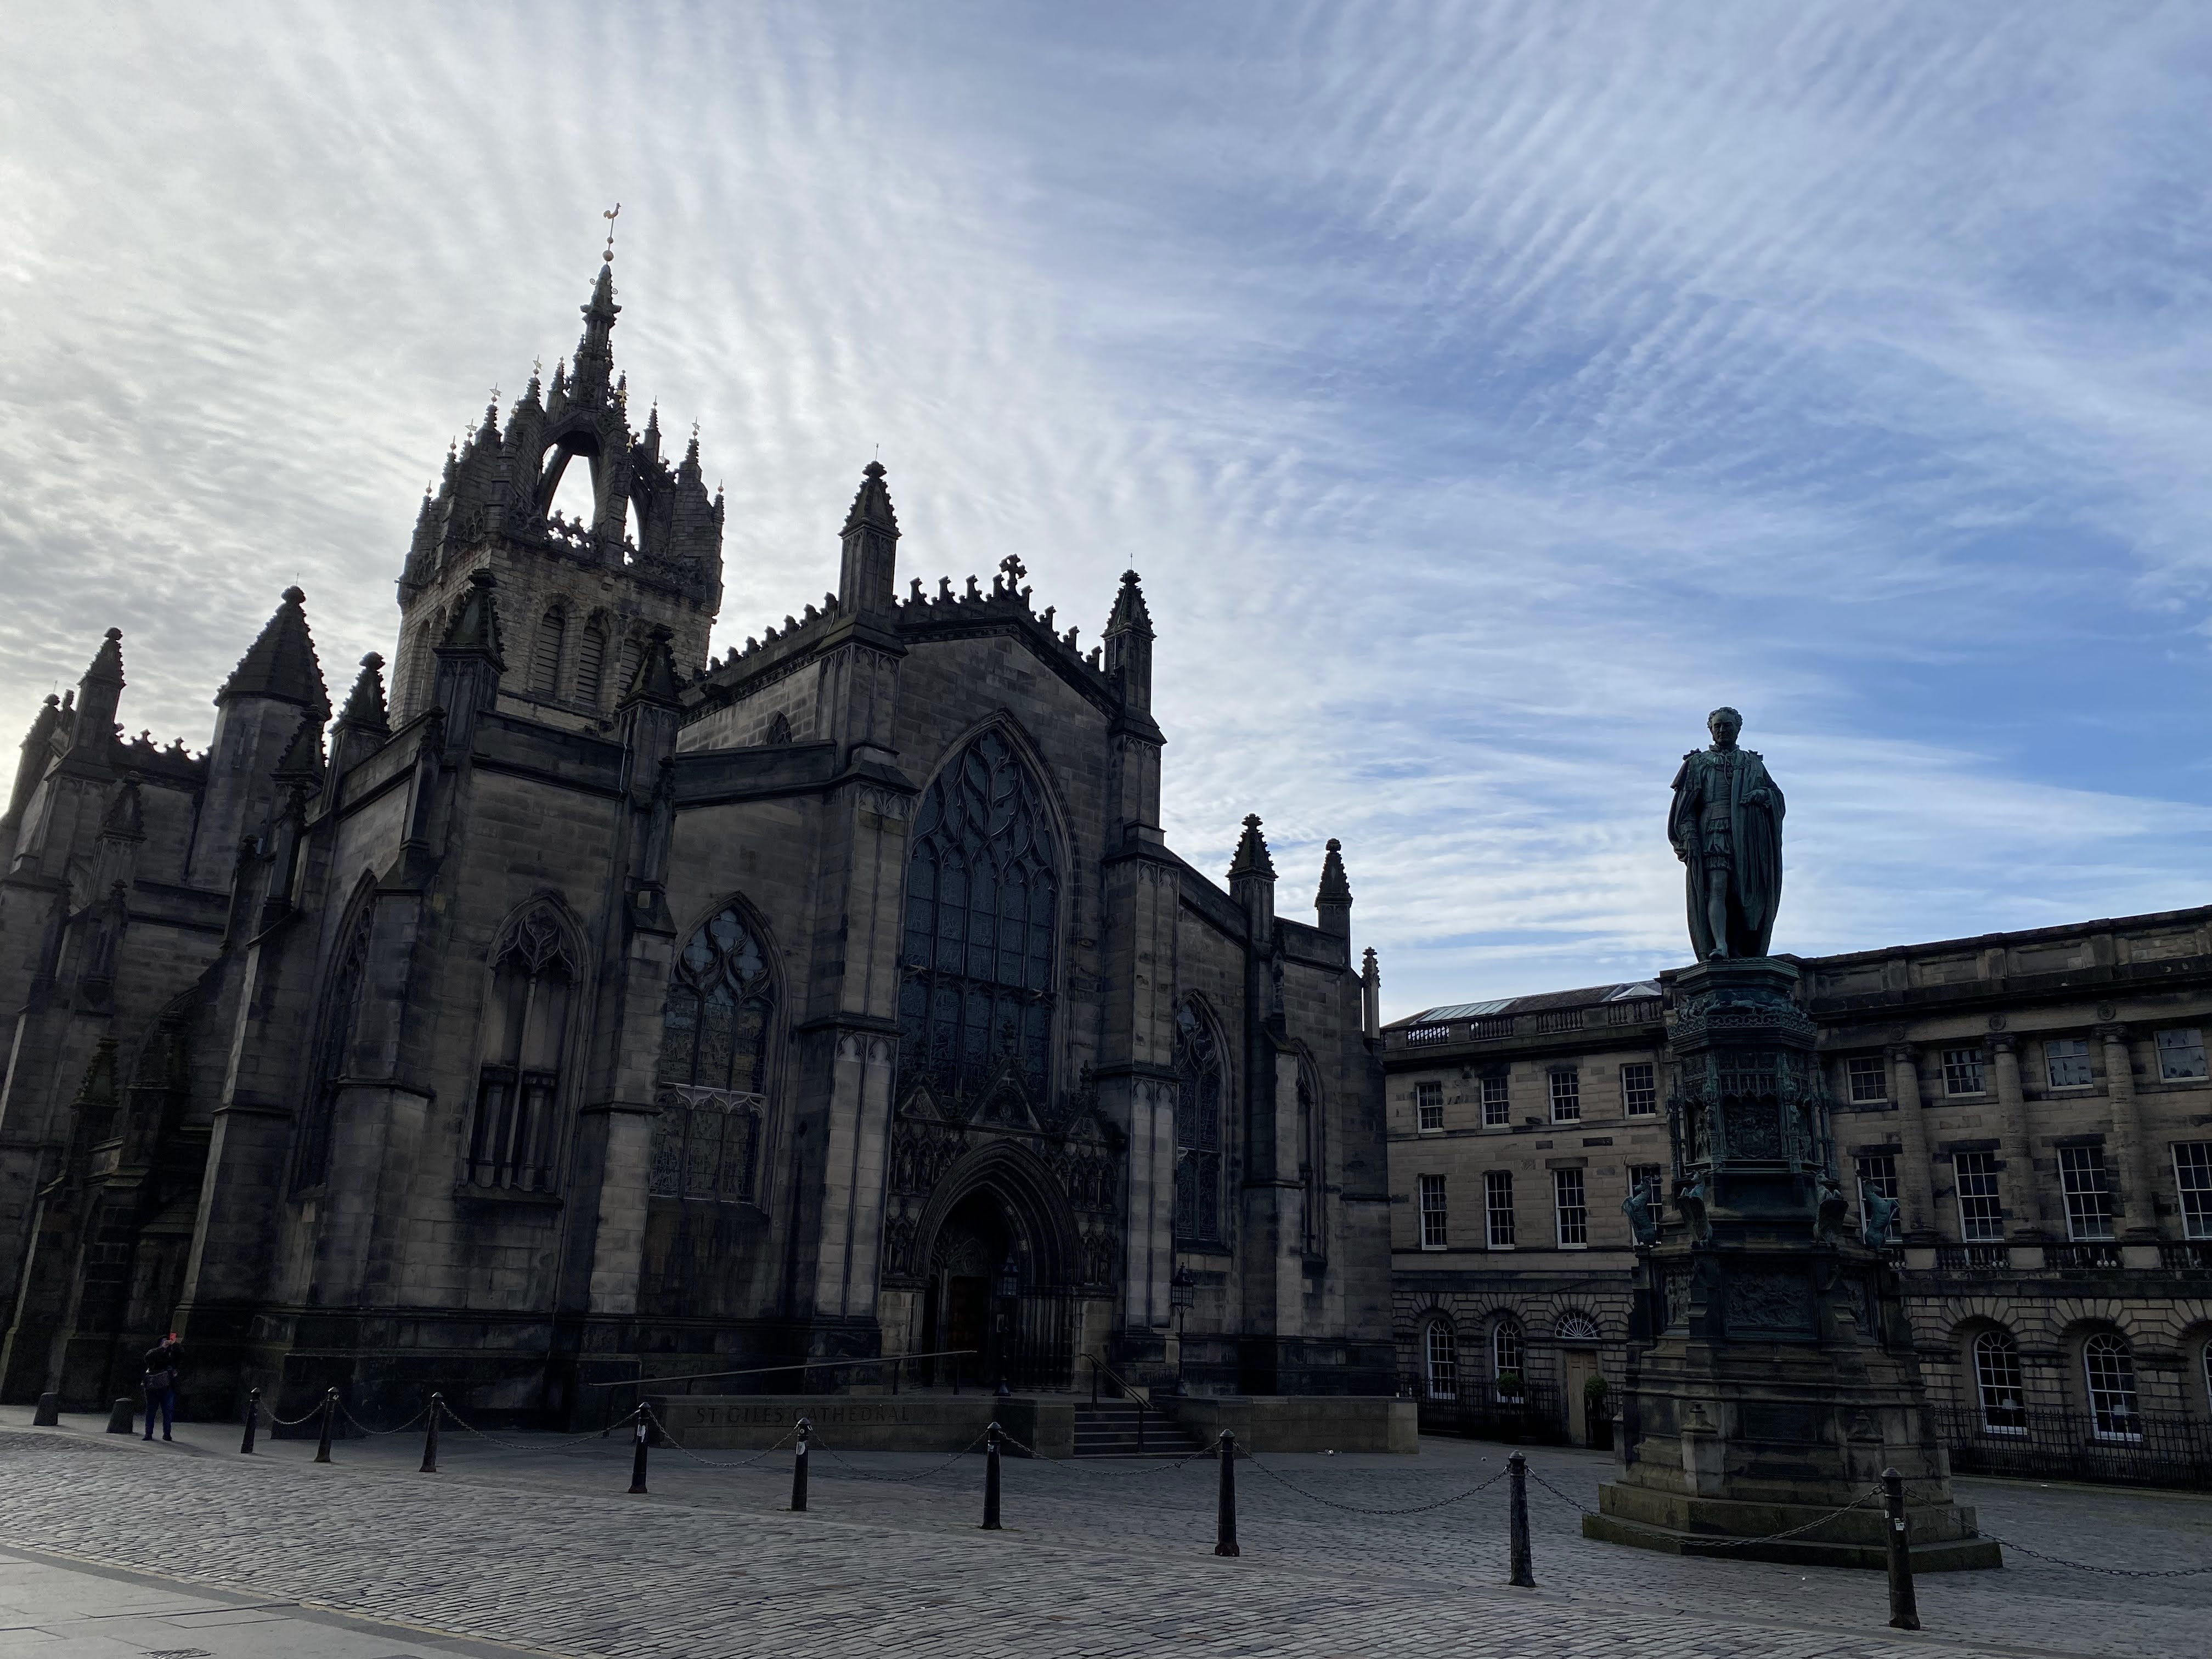 A view of St. Giles Cathedral